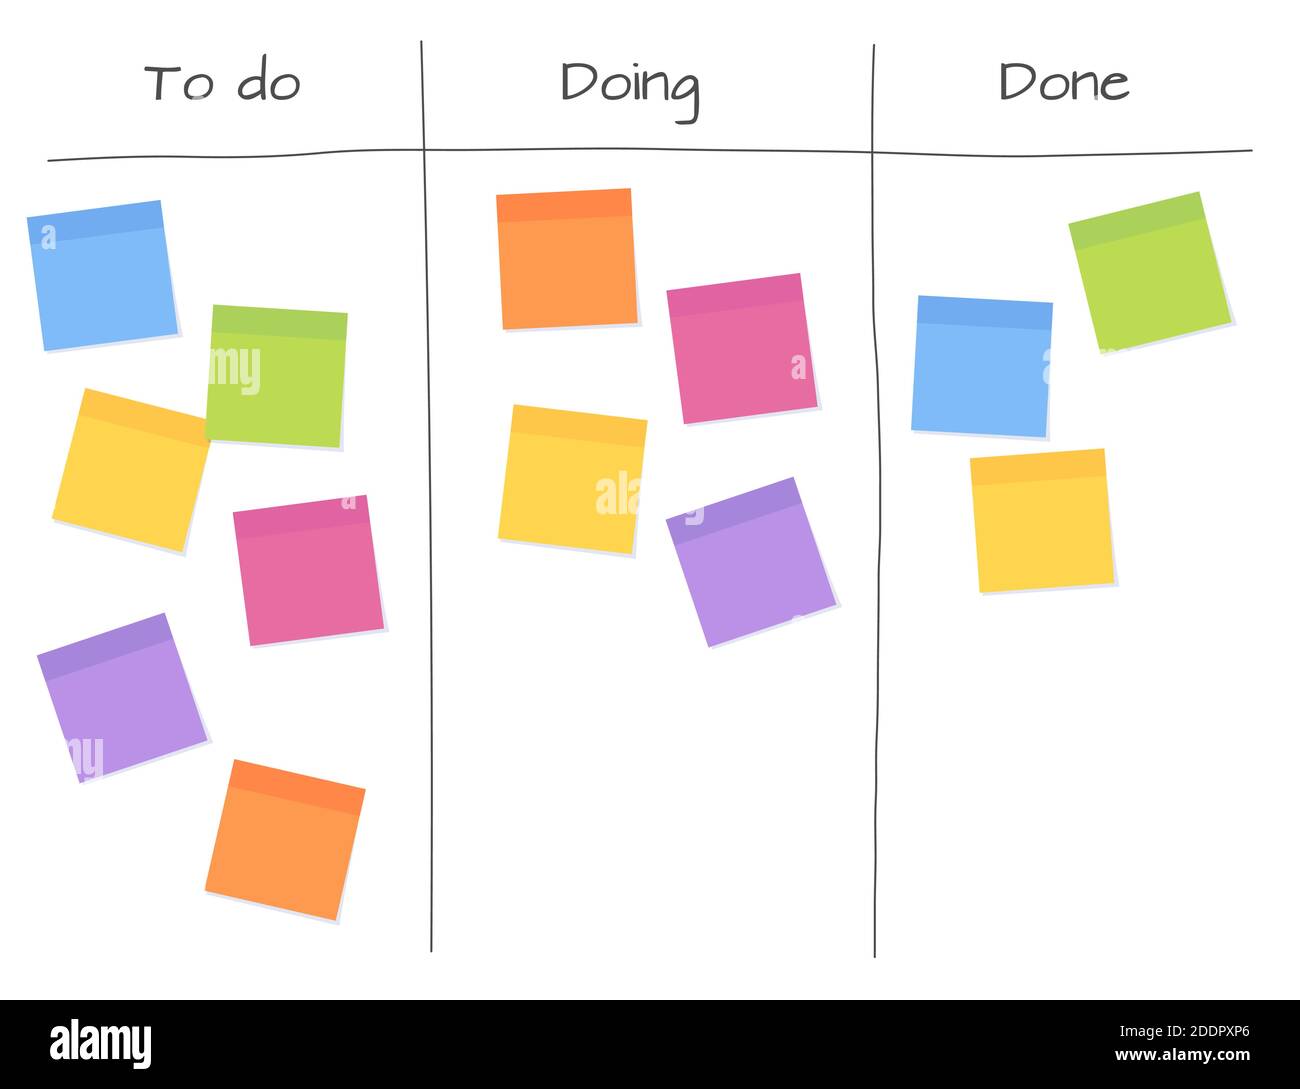 Agile planning - white board with blank sticky note papers for